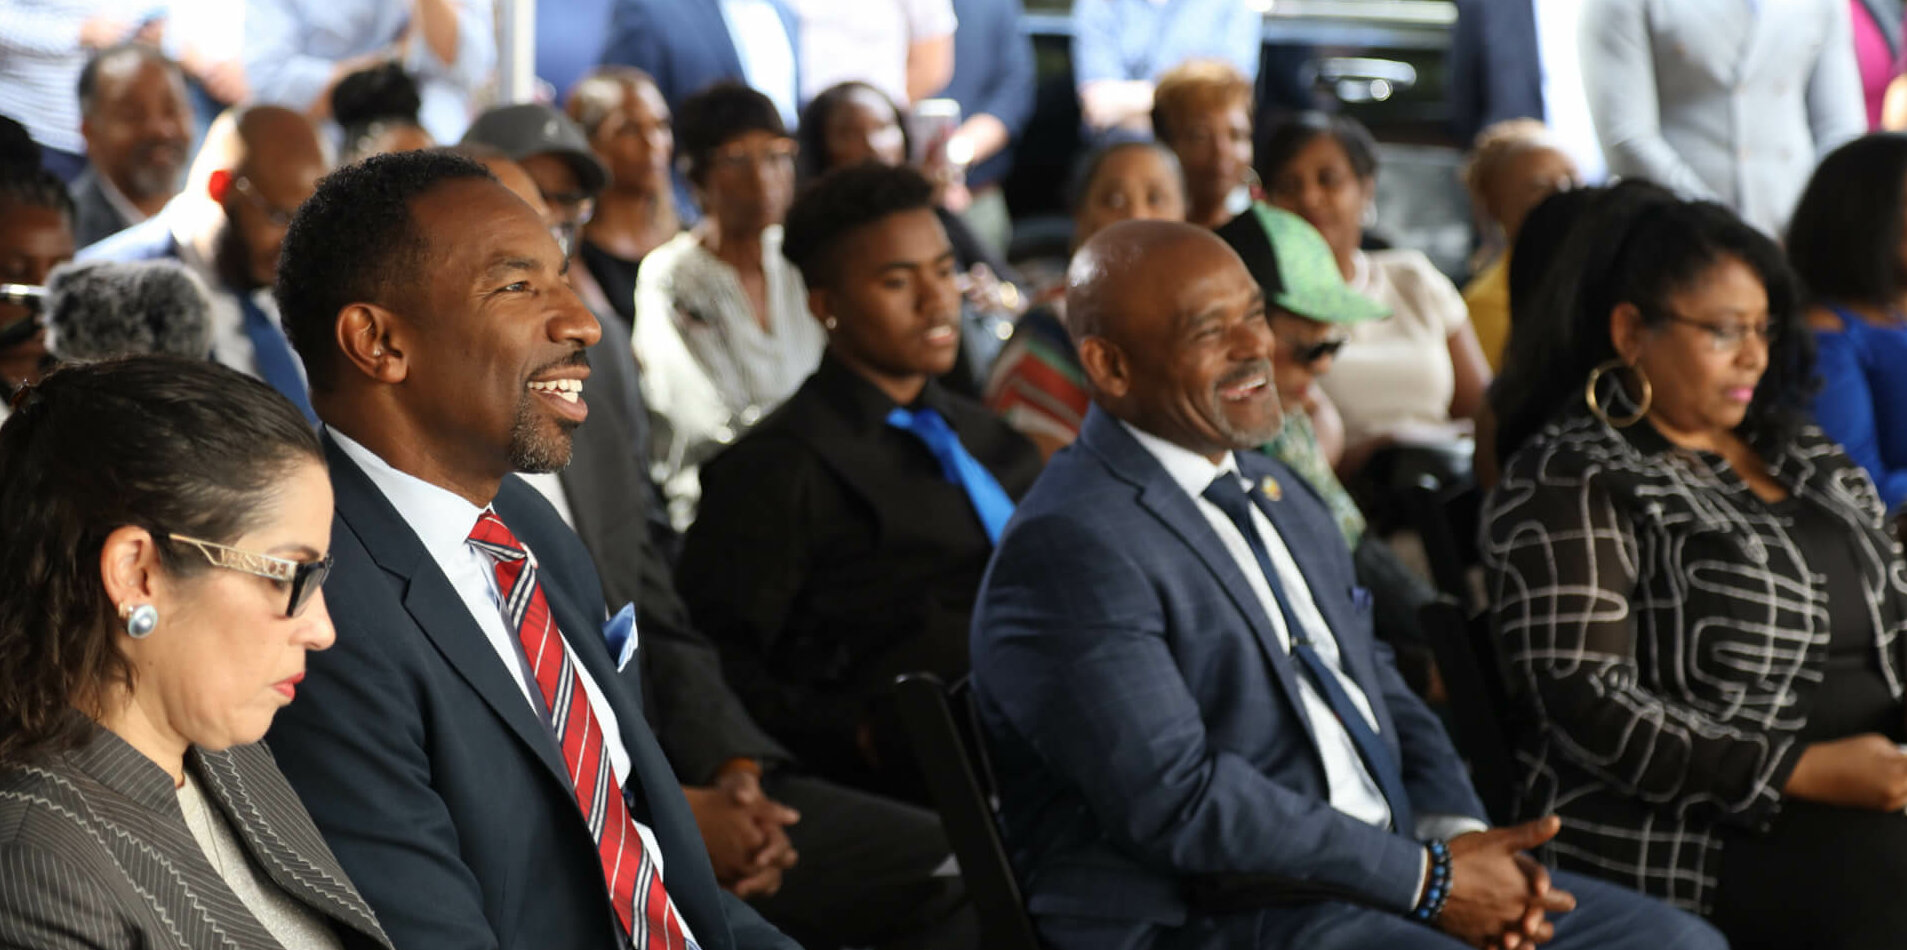 Atlanta mayor Andre Dickens and other local leaders gathered for the ribbon-cutting and opening of James Allen Jr. Place, a newly refurbished 129-unit affordable housing complex for the city's senior and disabled populations.